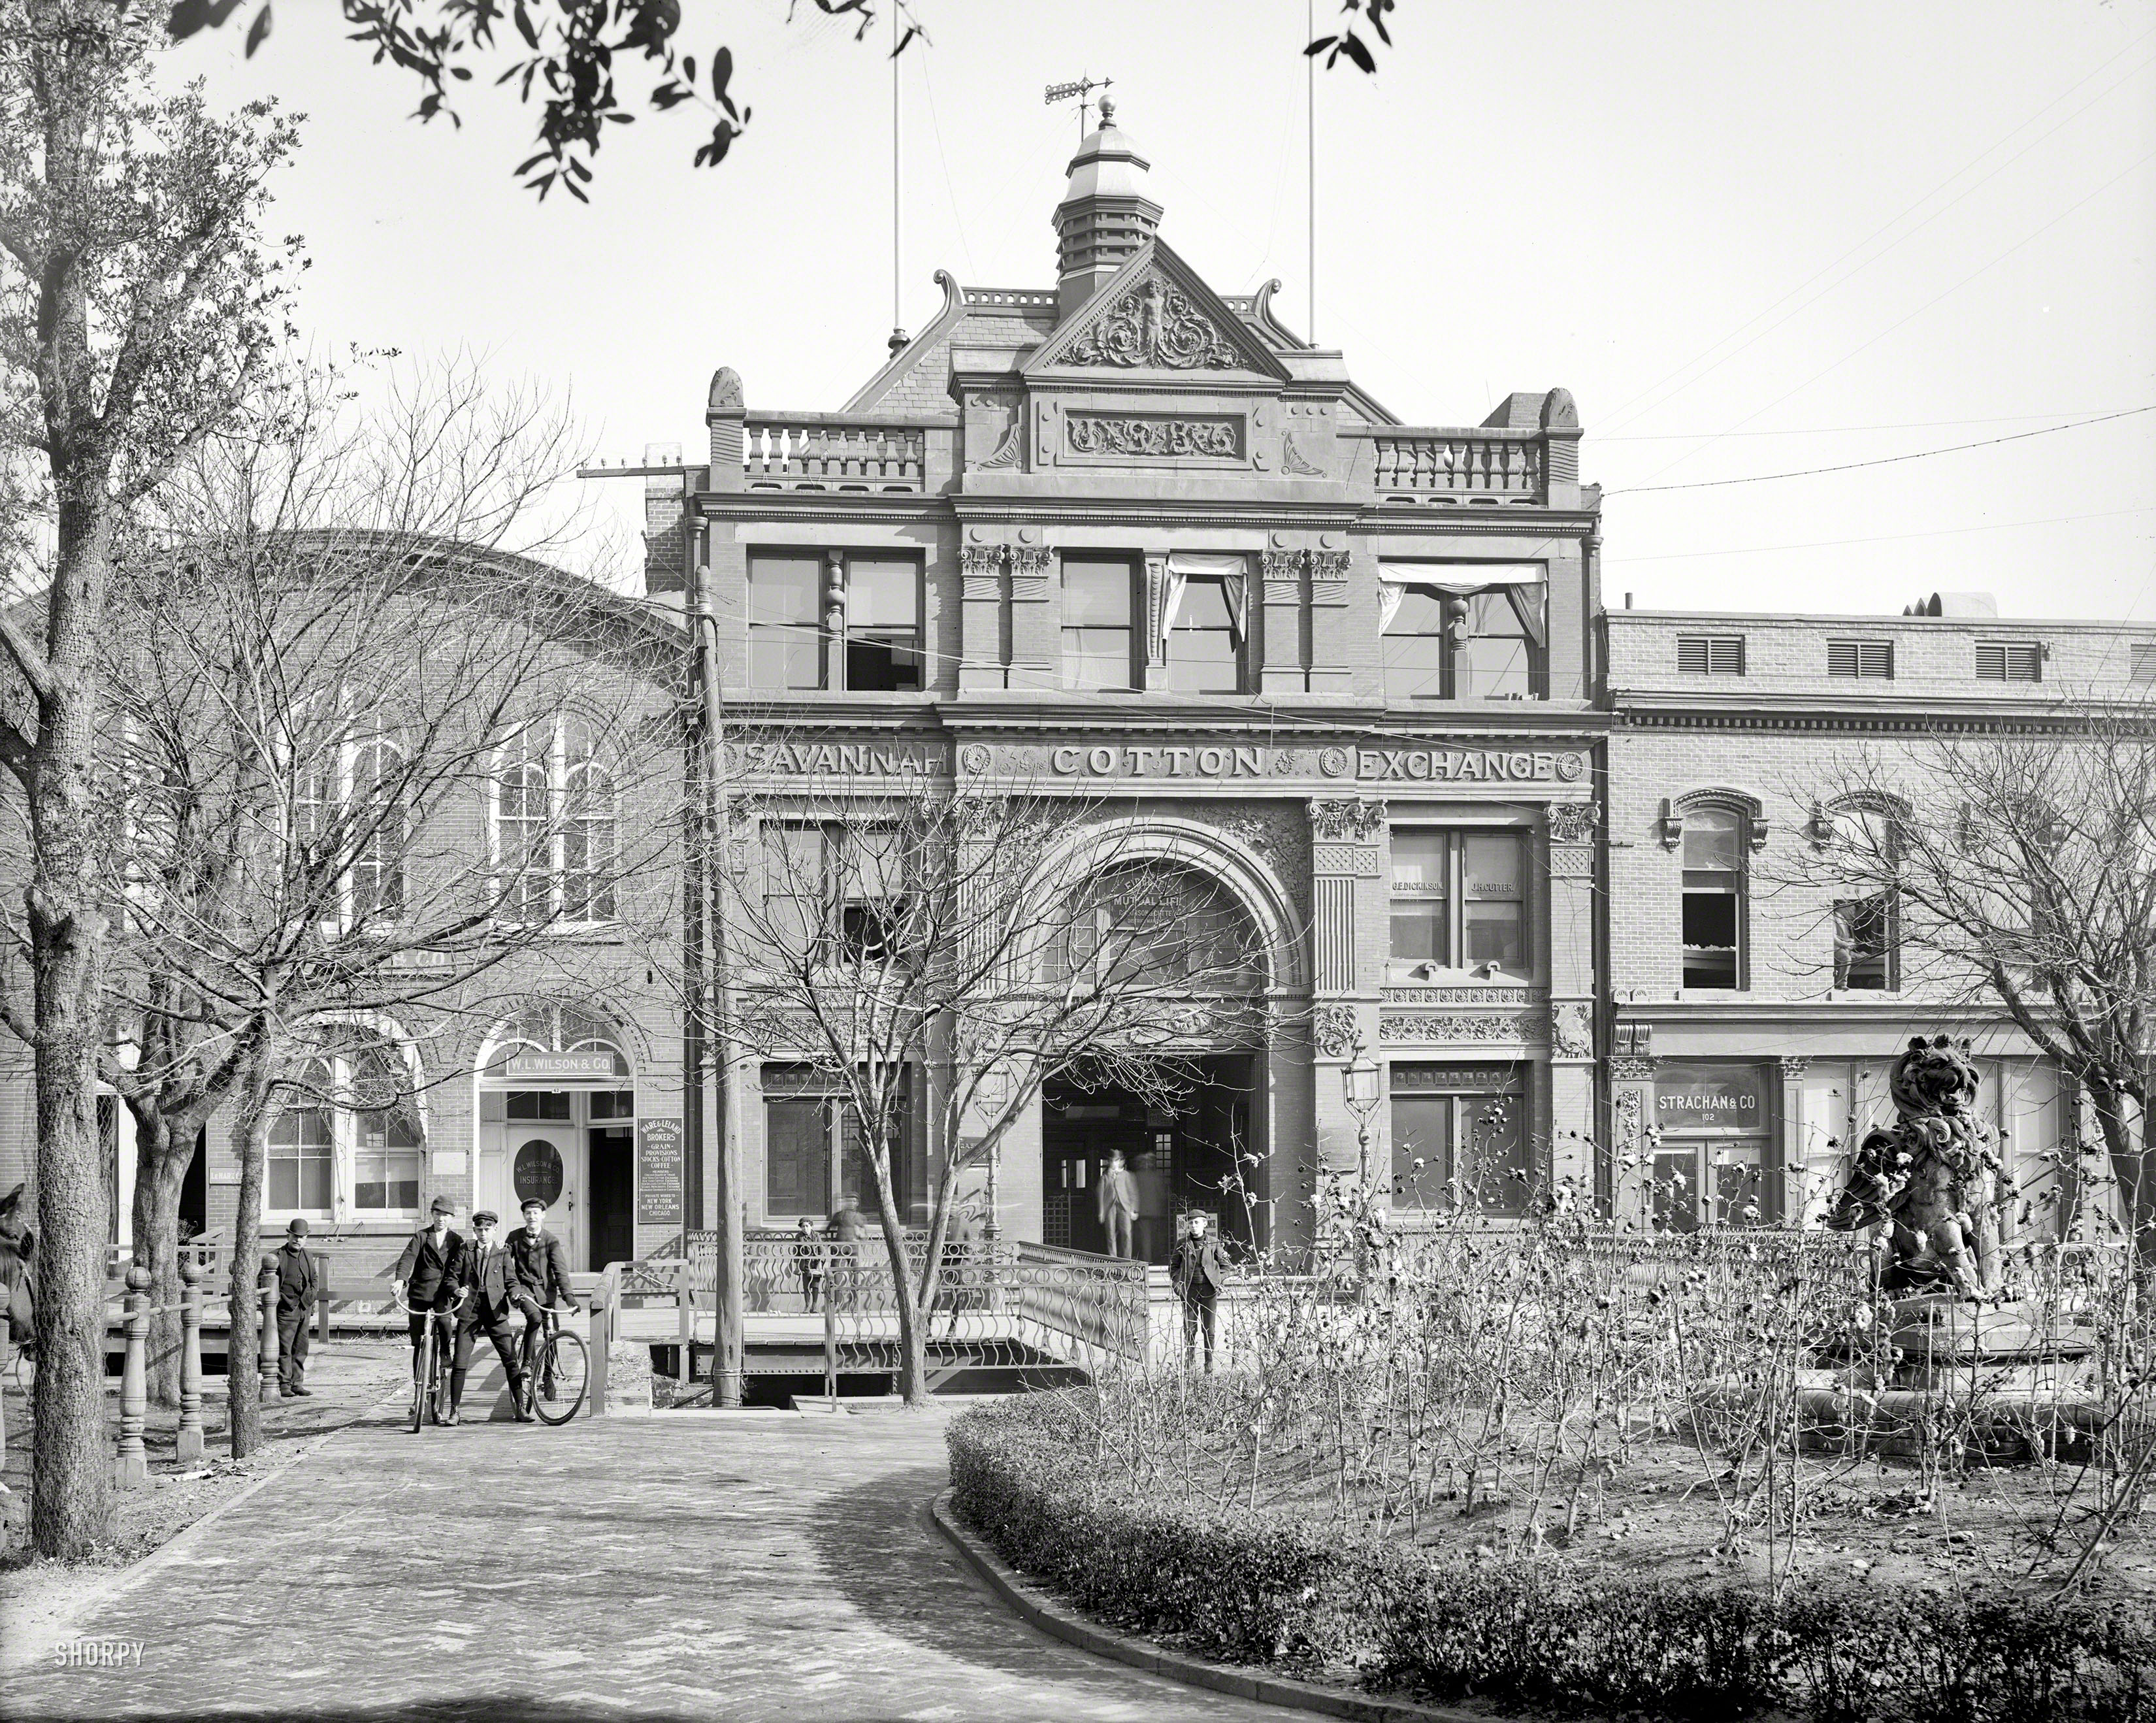 Georgia circa 1904. "Savannah Cotton Exchange." Note cotton-themed fountain landscaping and juvenile welcoming committee. 8x10 inch dry plate glass negative, Detroit Publishing Company. View full size.